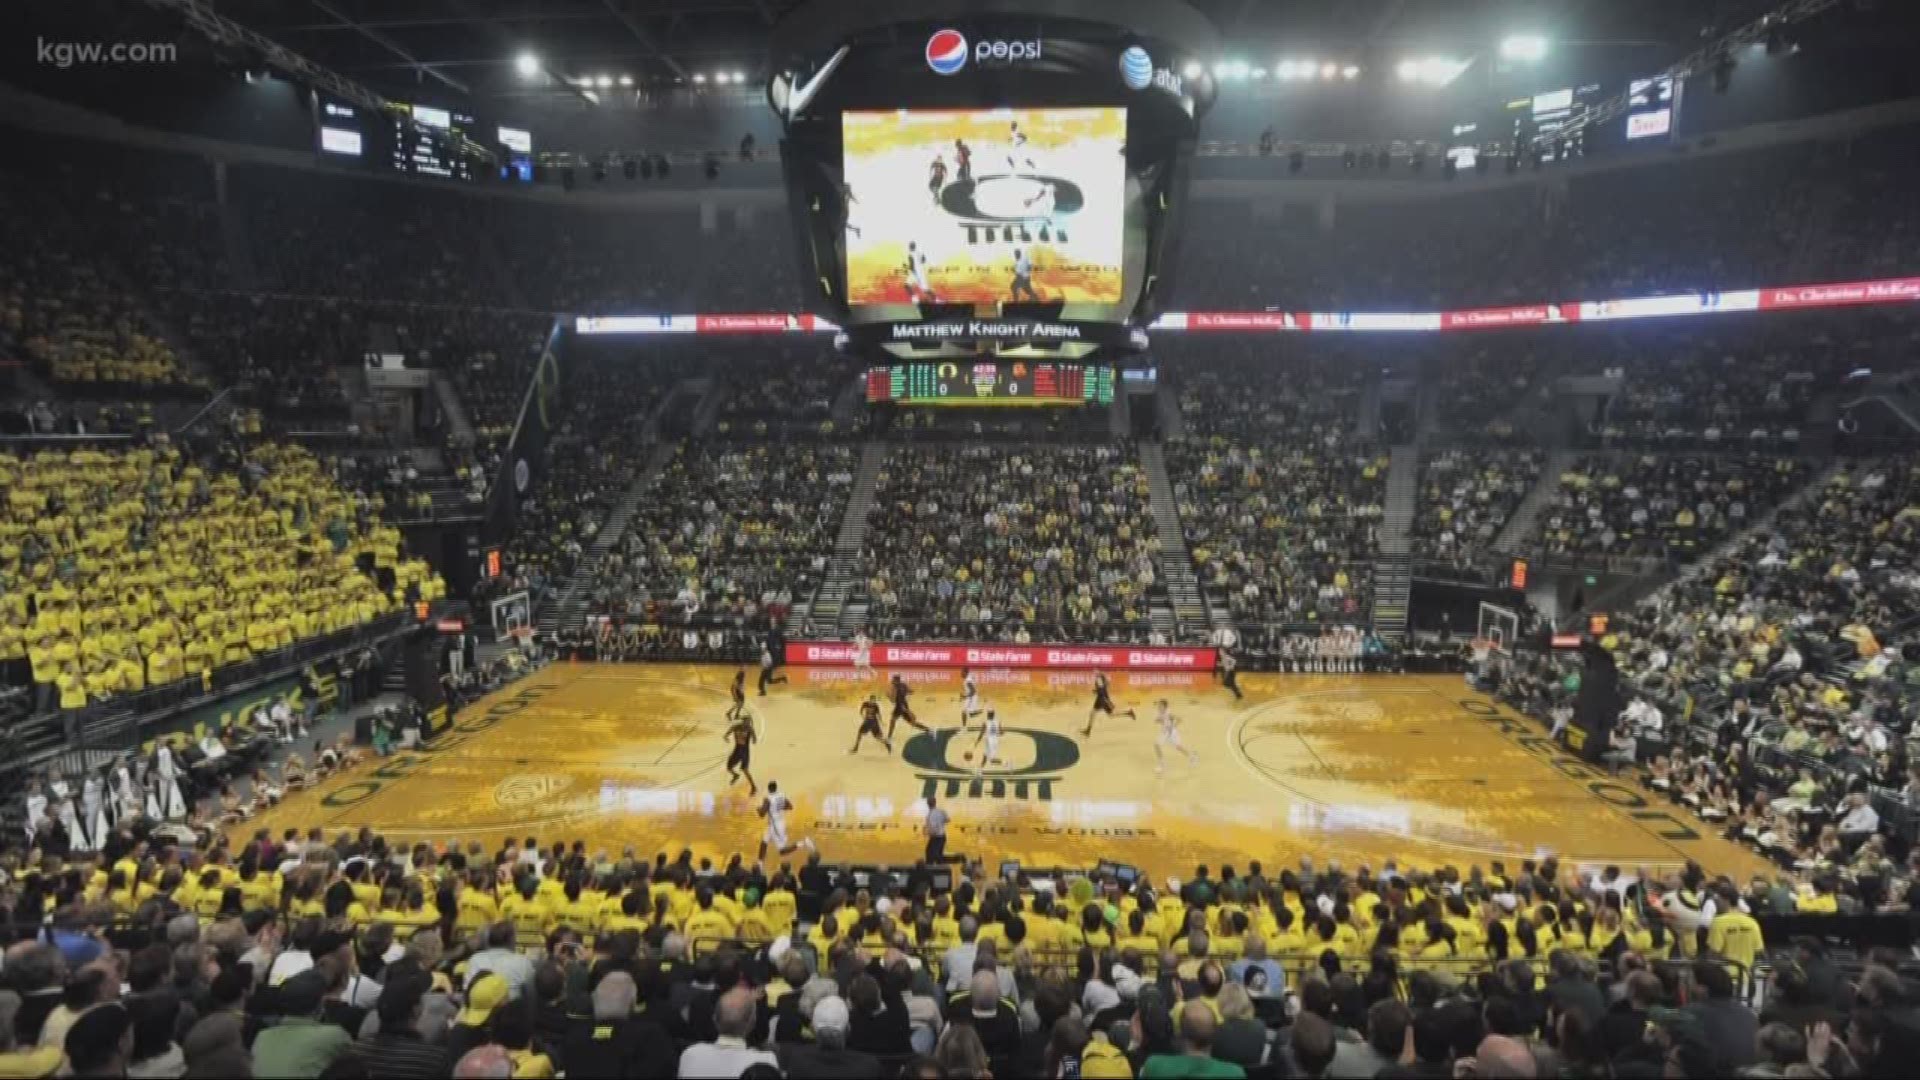 The University of Oregon was implicated during the opening statements of the  NCAA corruption trial.